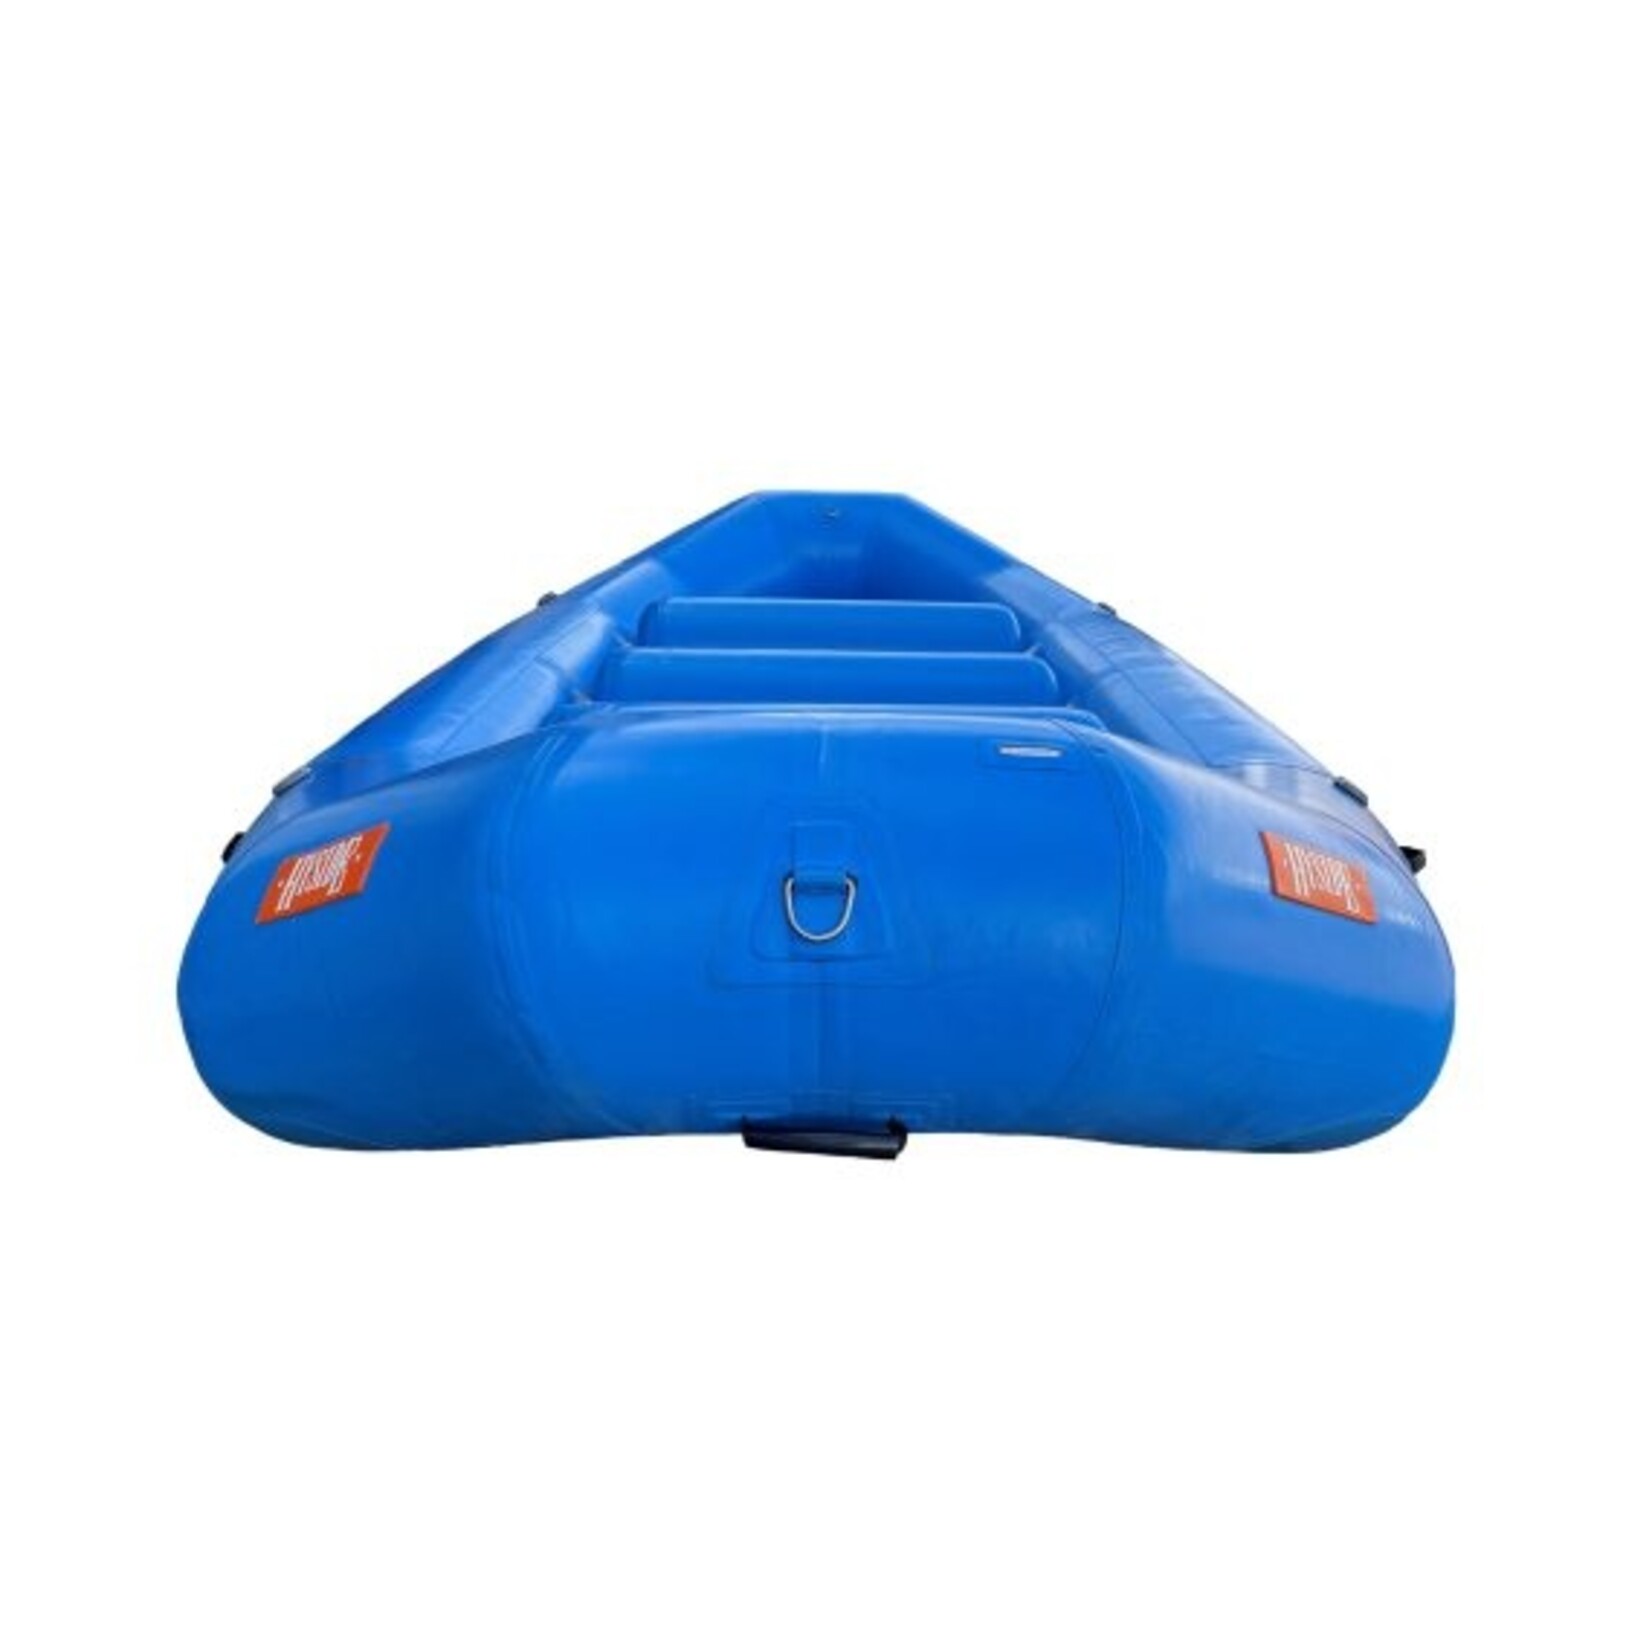 Hyside Inflatables Hyside Outfitter 14.0